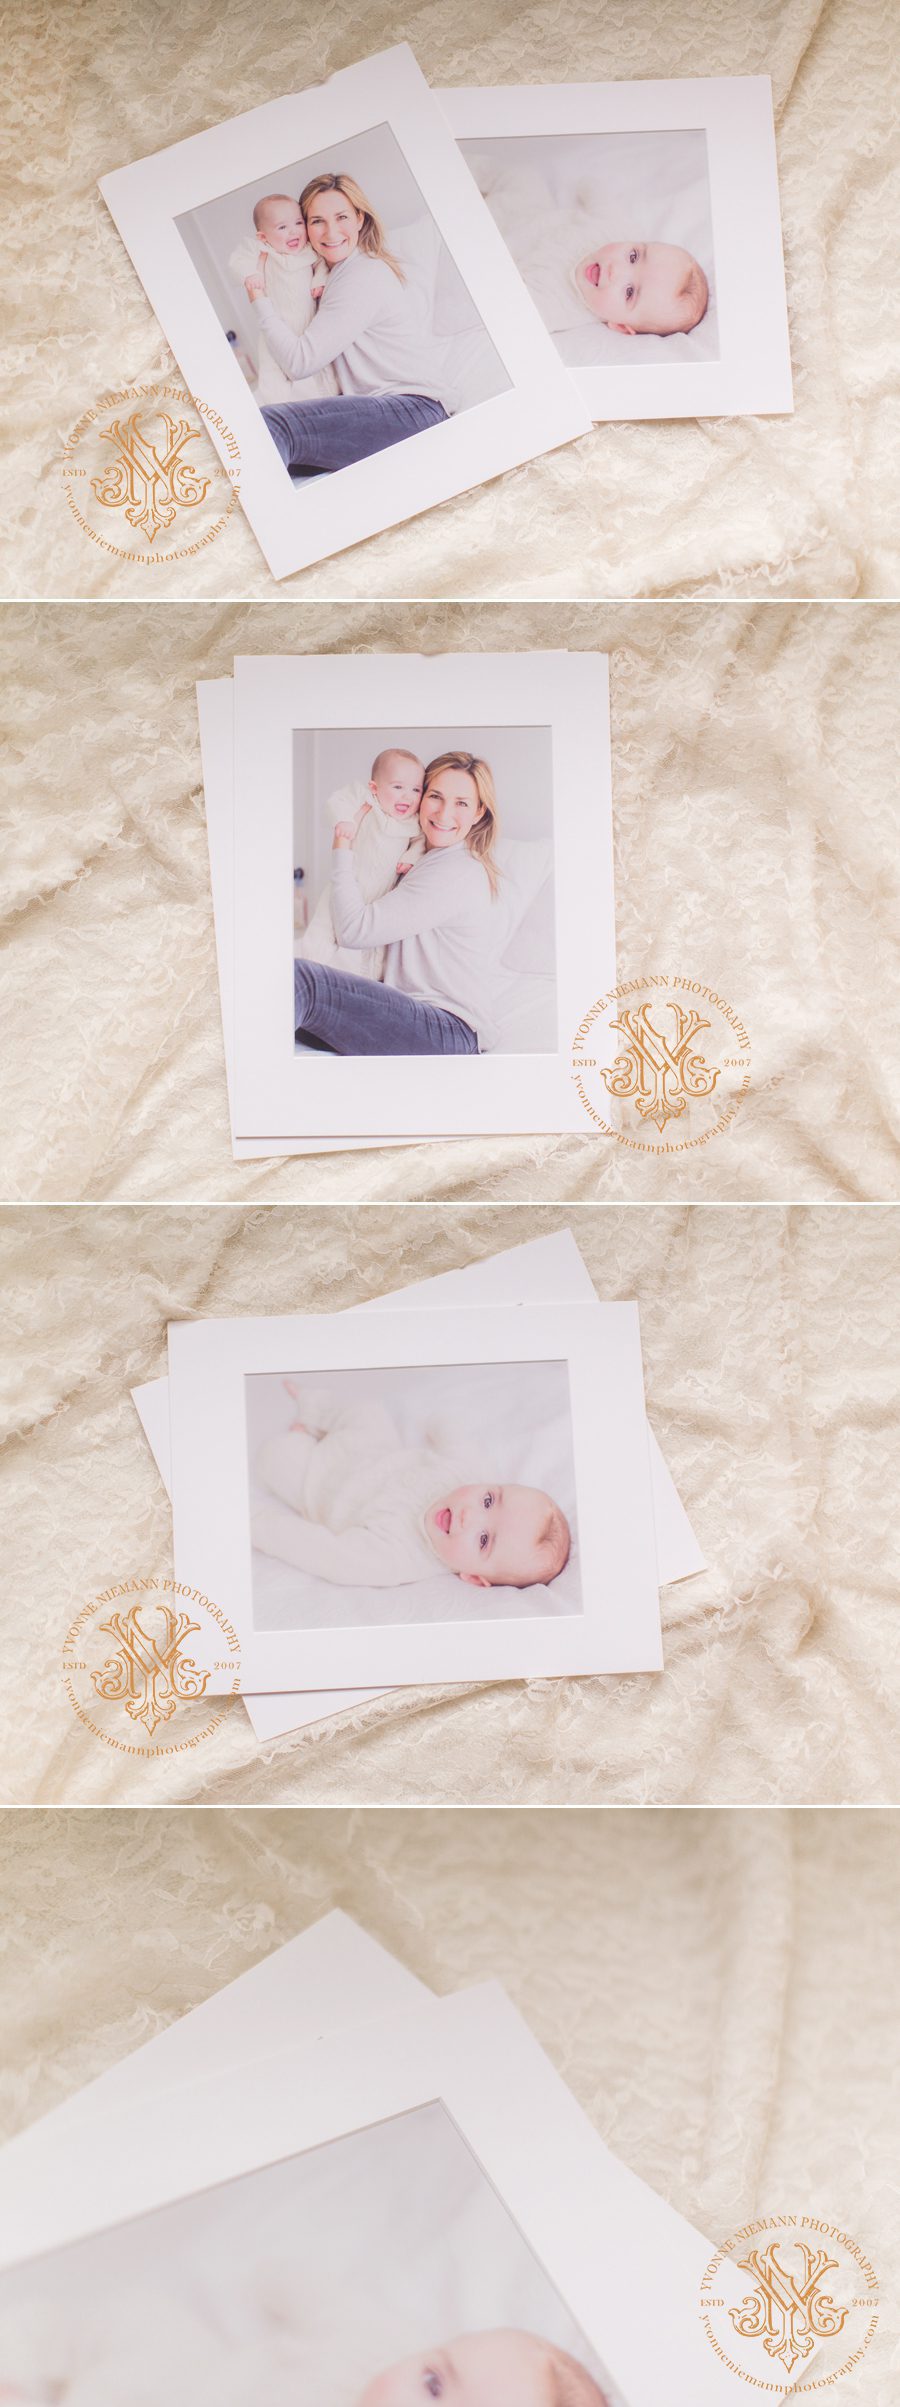 Matted portraits of baby and mother by Athens, GA family photographer, Yvonne Niemann Photography.